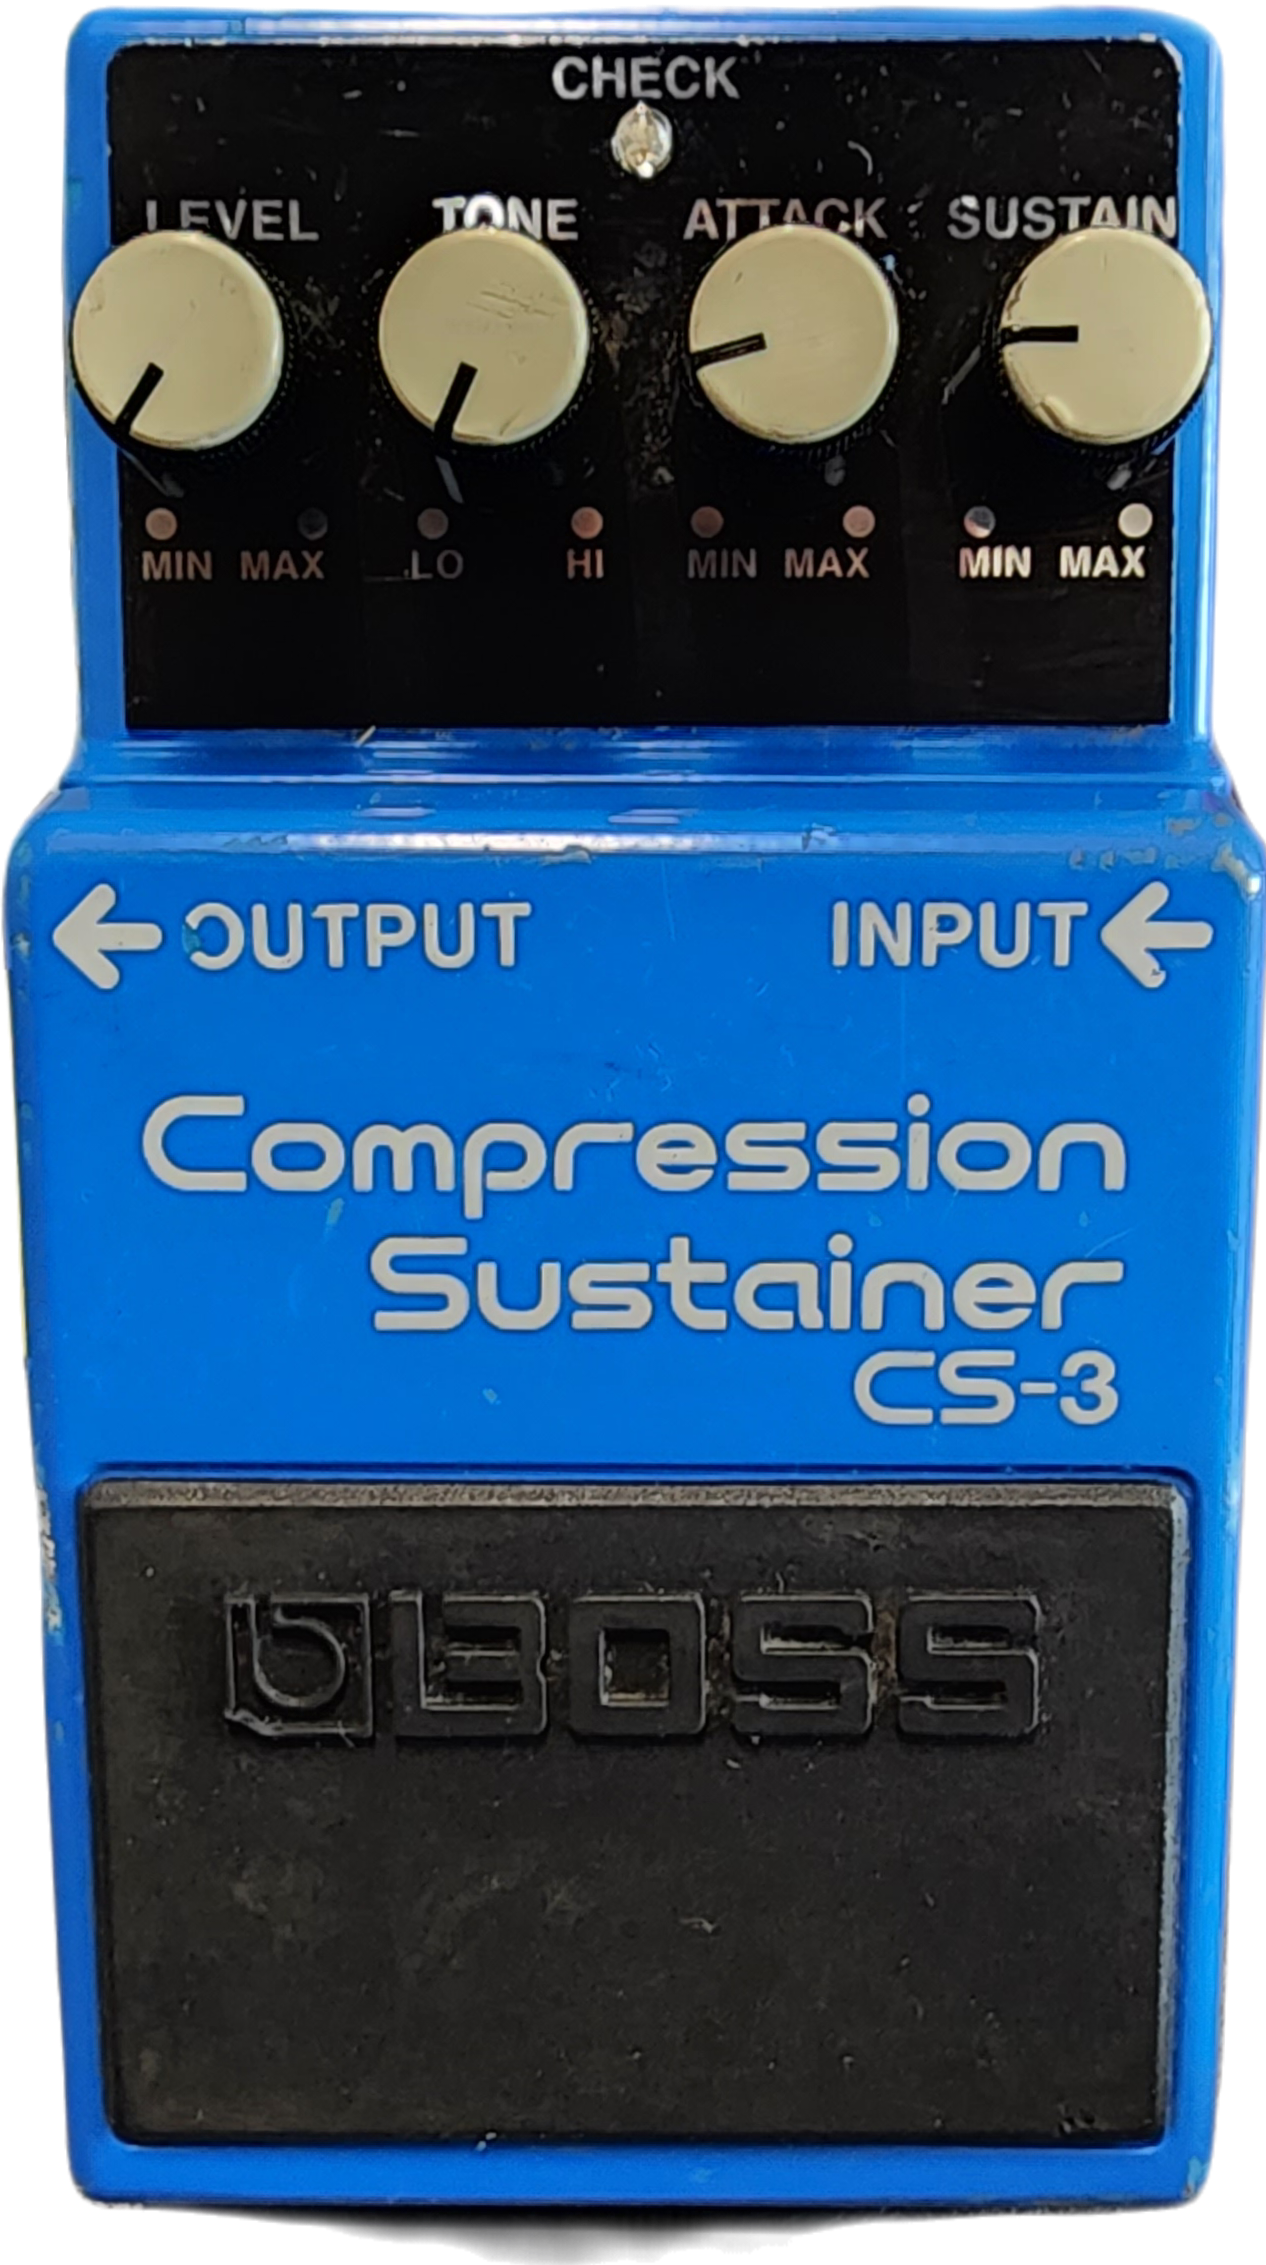 BOSS CS-3 Compression Sustainer Guitar Pedal